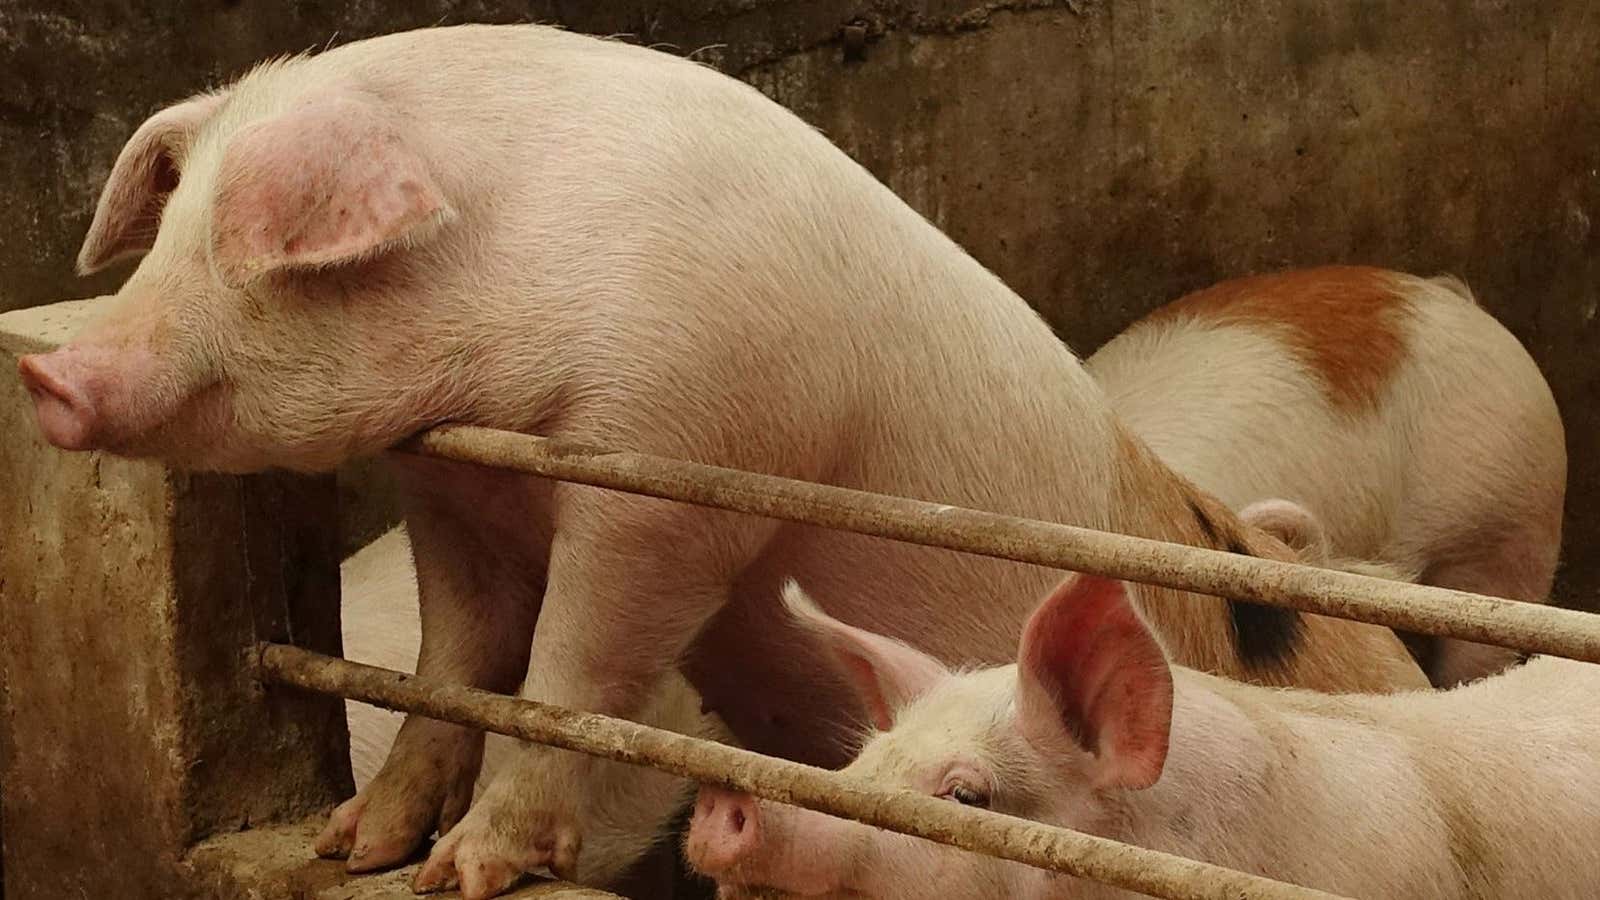 US soybeans may be the surprise casualty of swine fever in China